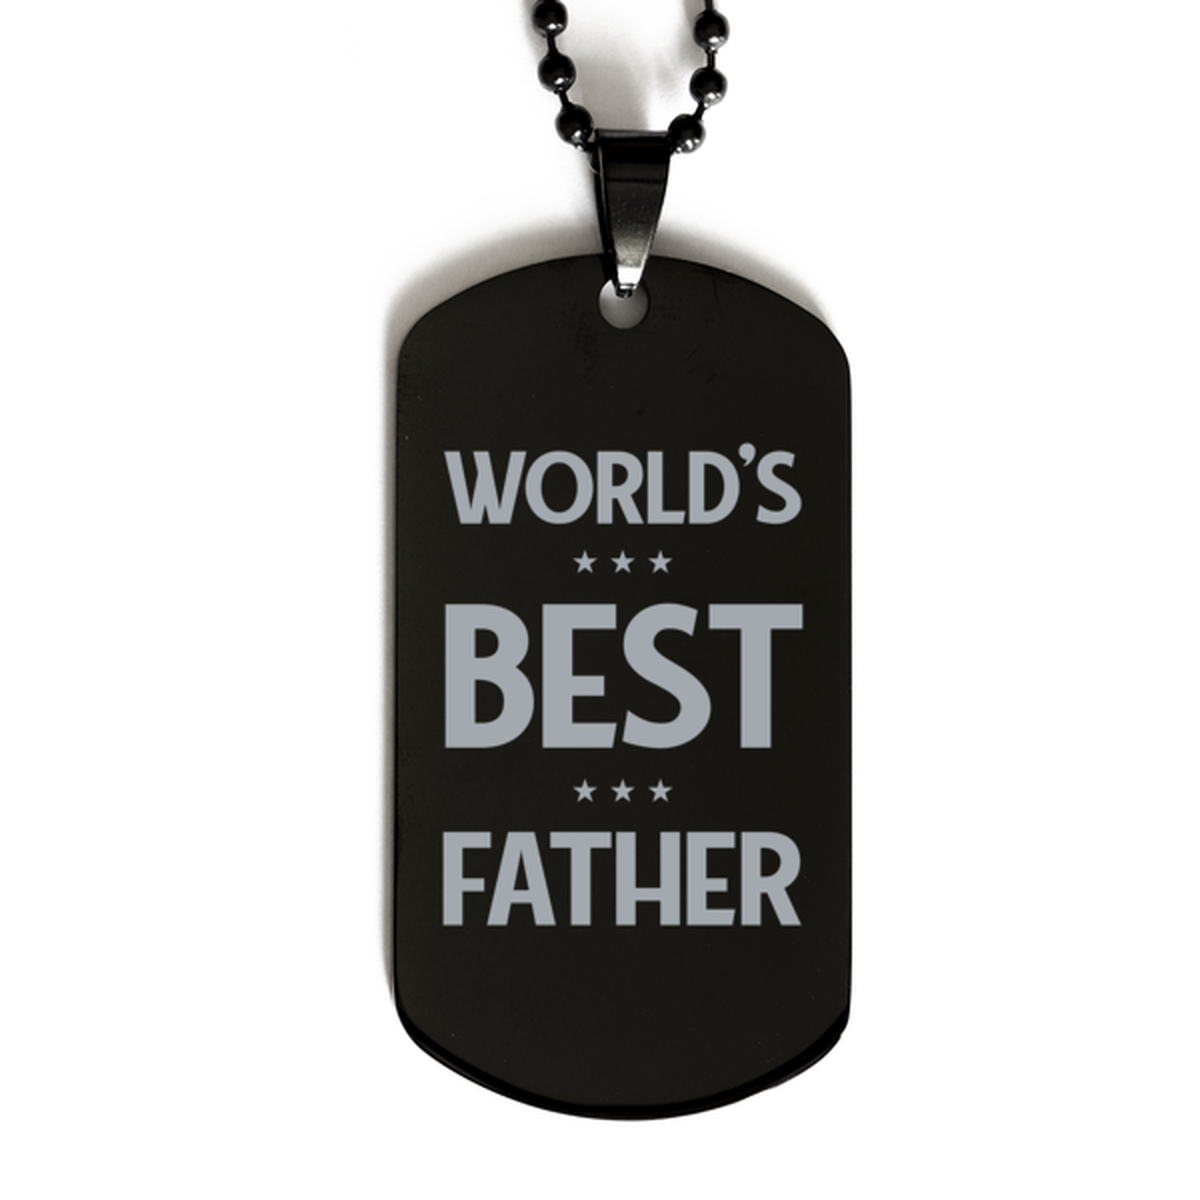 Worlds Best Father Gifts, Funny Black Engraved Dog Tag For Father, Birthday Presents For Men